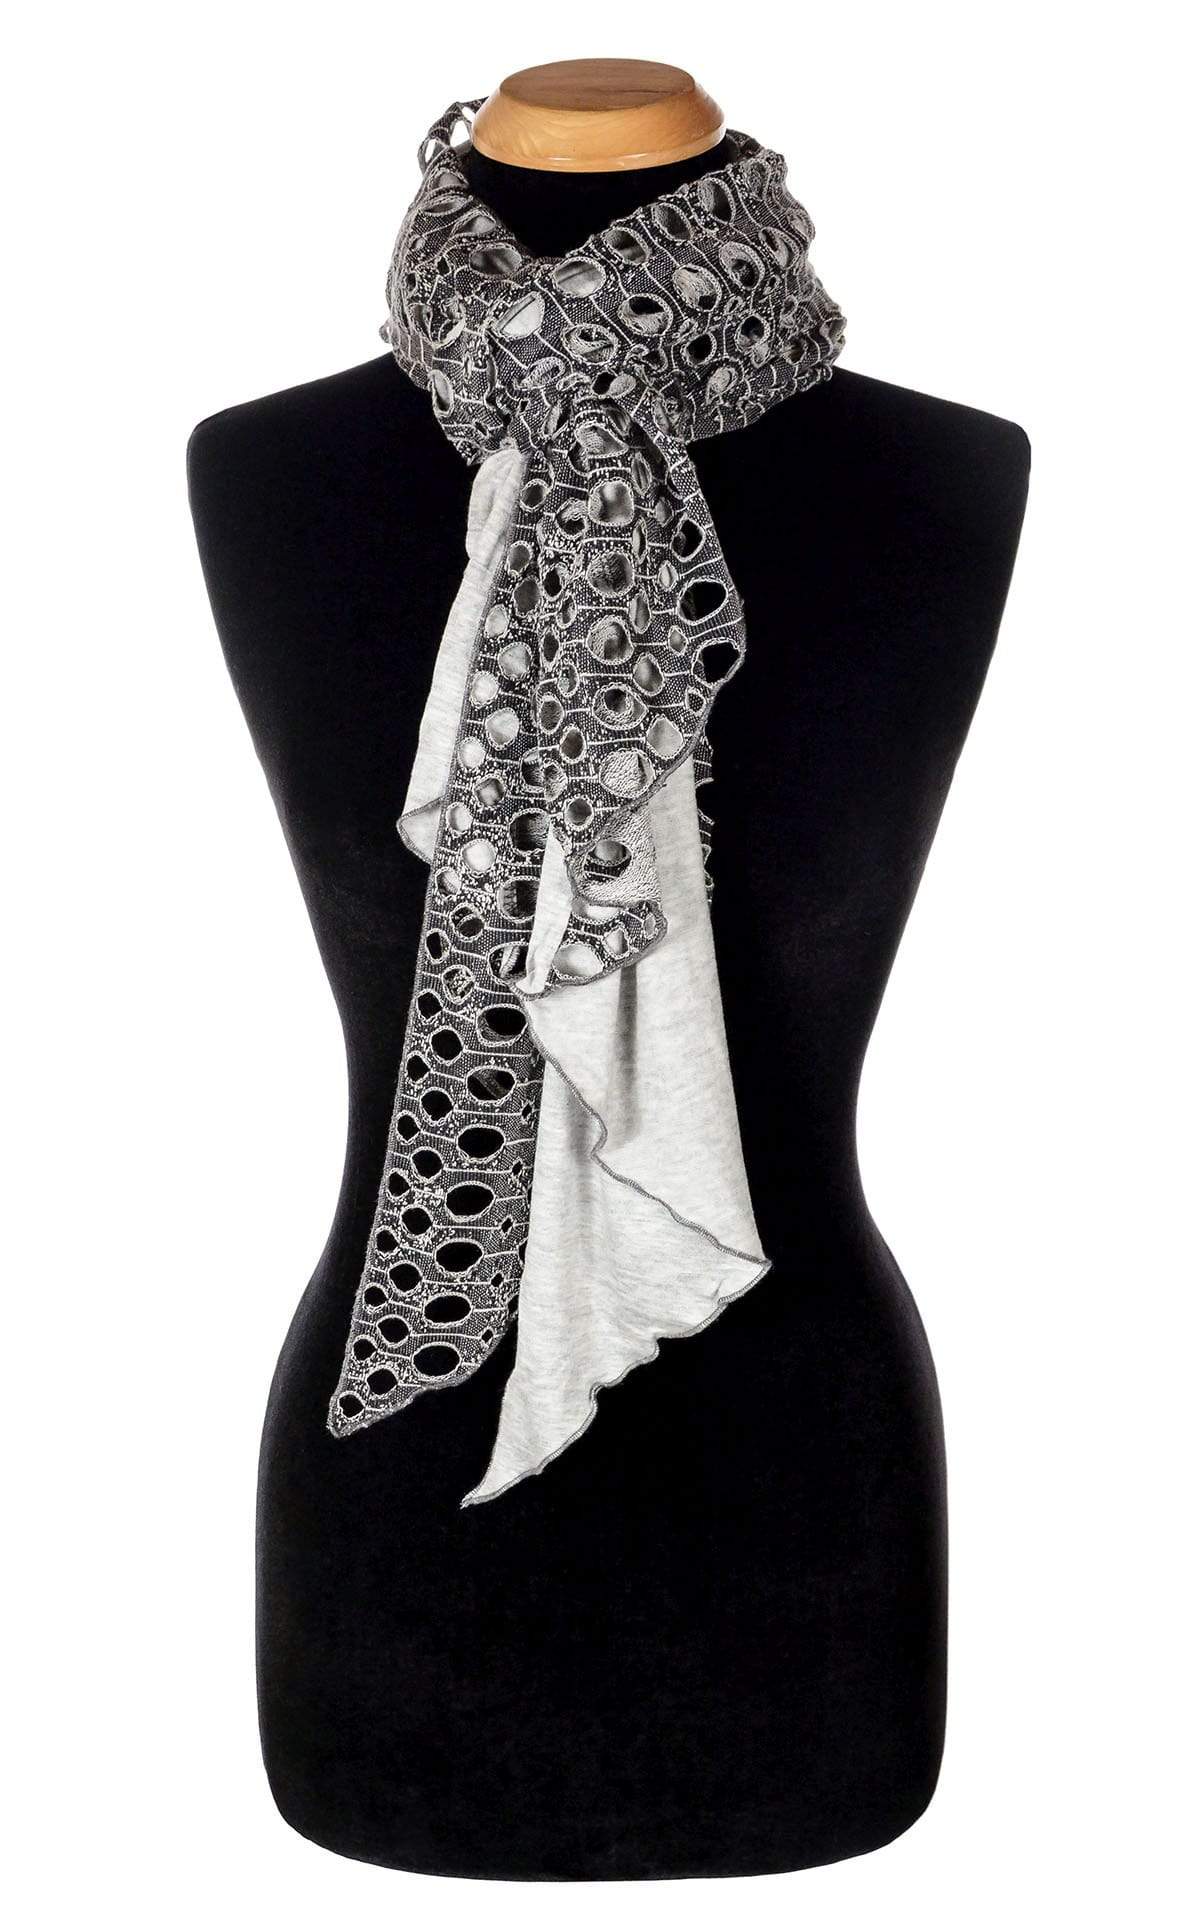 Ladies Two-Tone Handkerchief Scarf on Mannequin | Lunar Landing, a black and neutral knit with curled edges surrounding holes, paired with a light-weight Silver Gray Jersey Knit tied in loop | Handmade in Seattle WA | Pandemonium Millinery